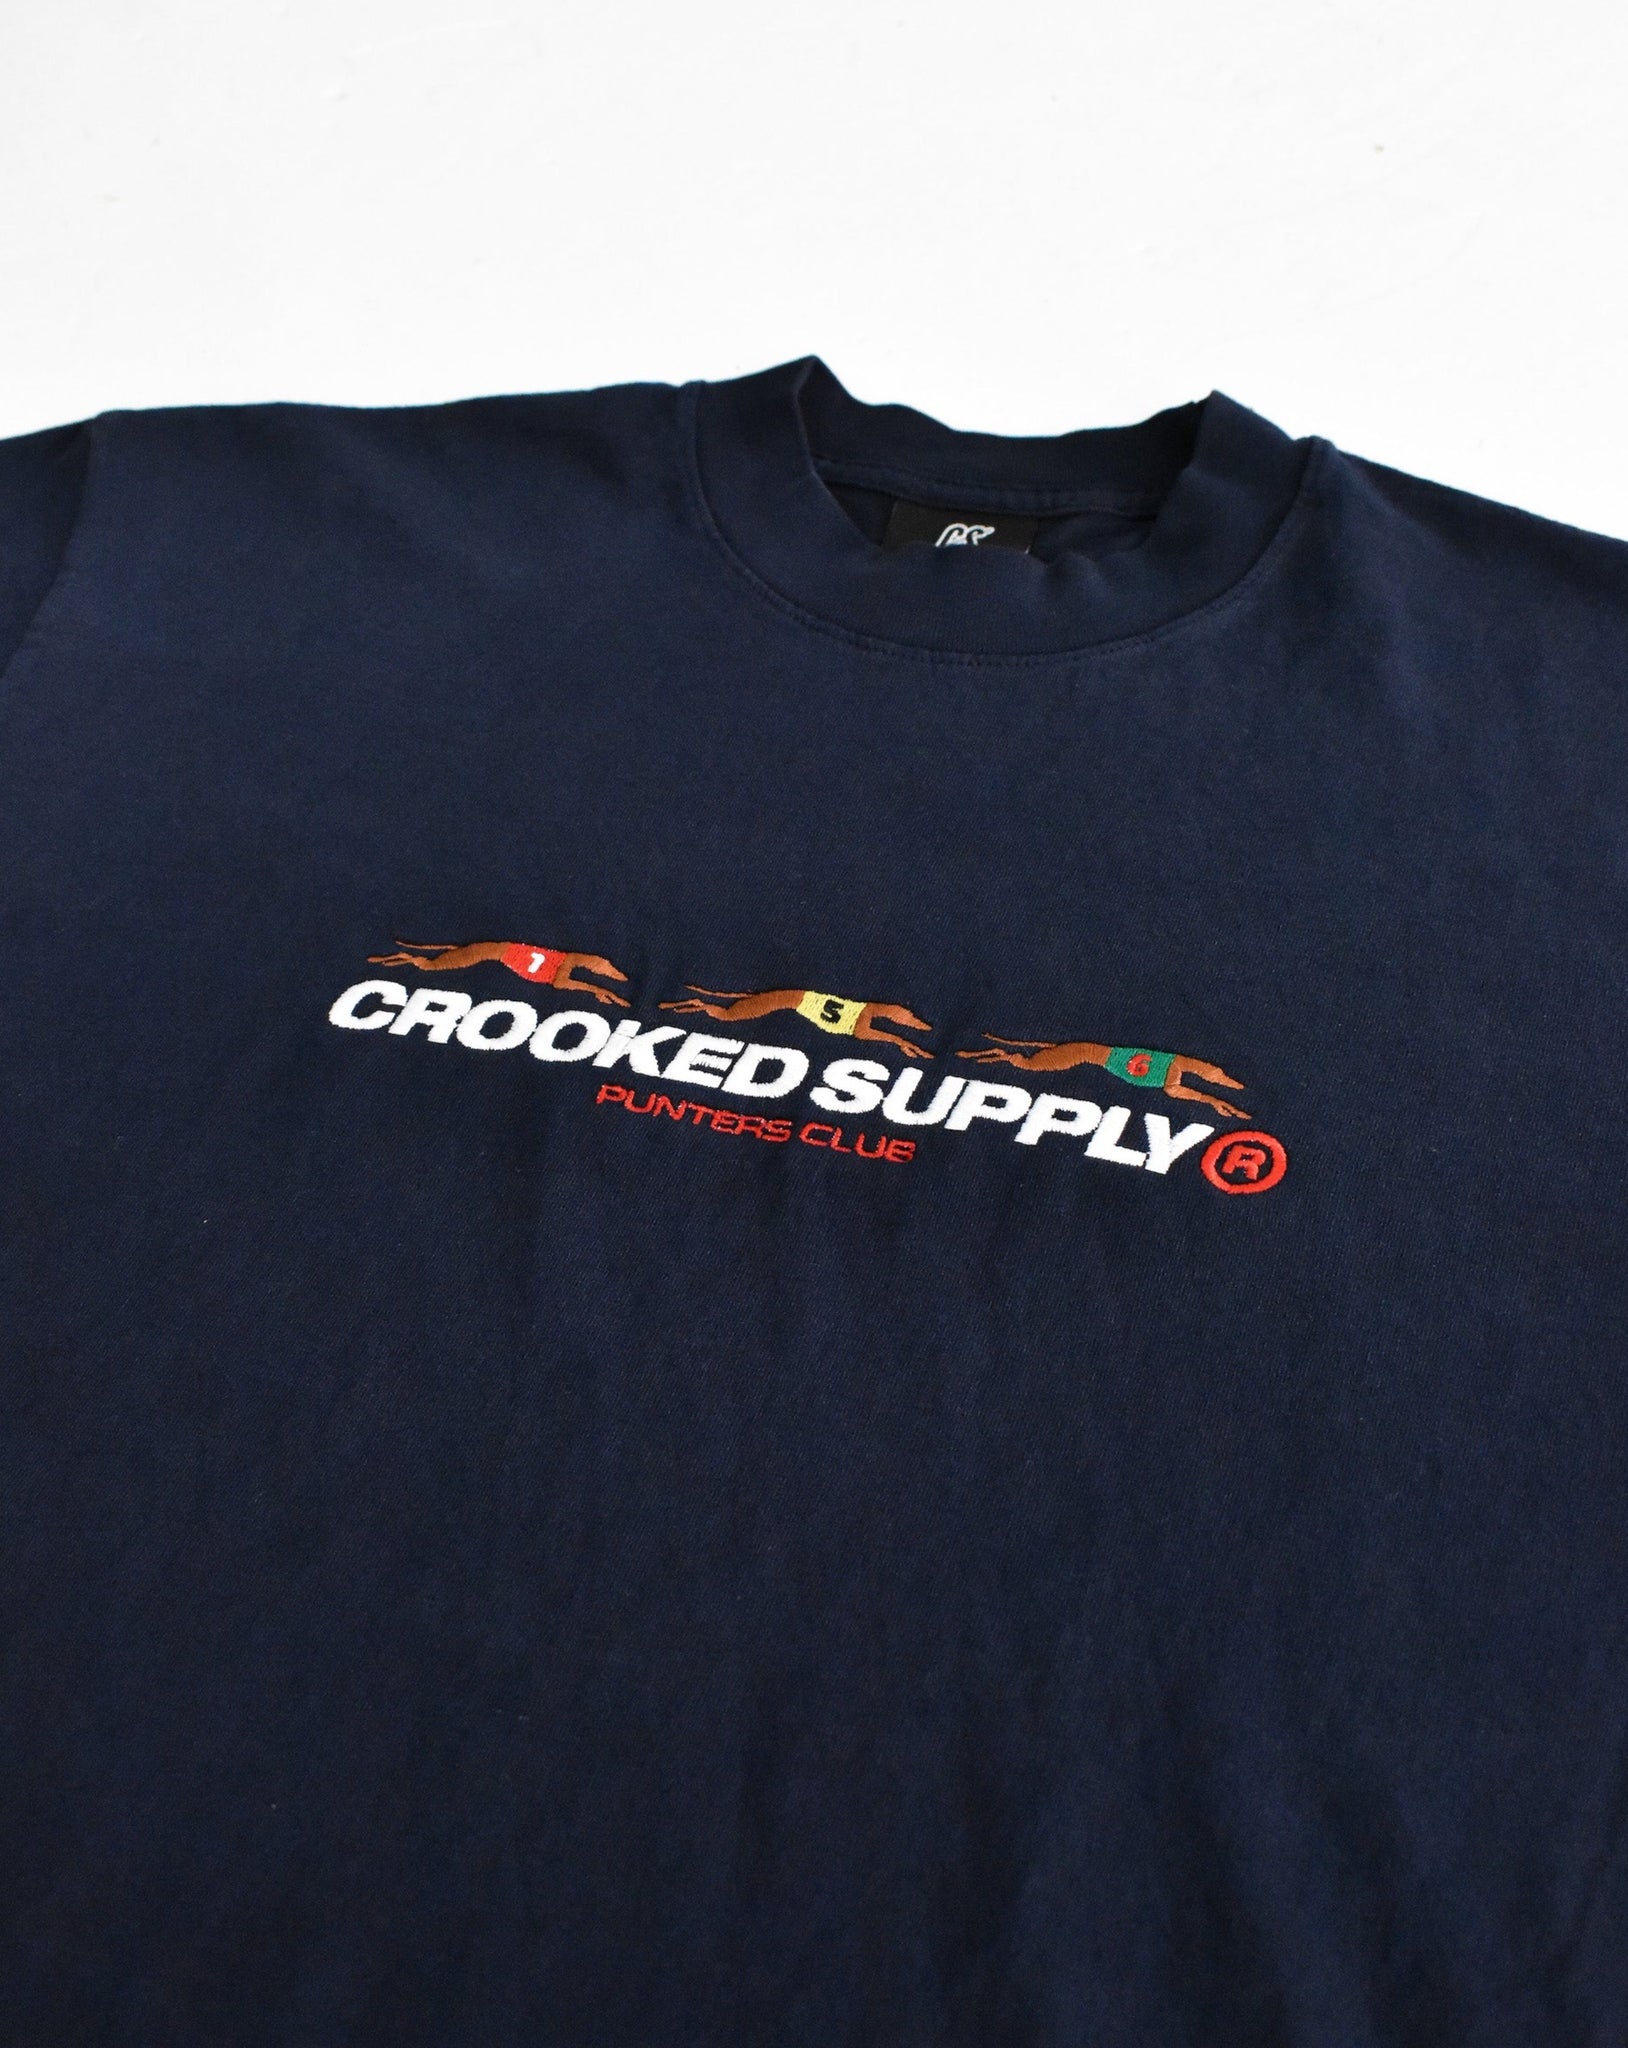 Punters Club Tee - Navy (Embroidered Logo)